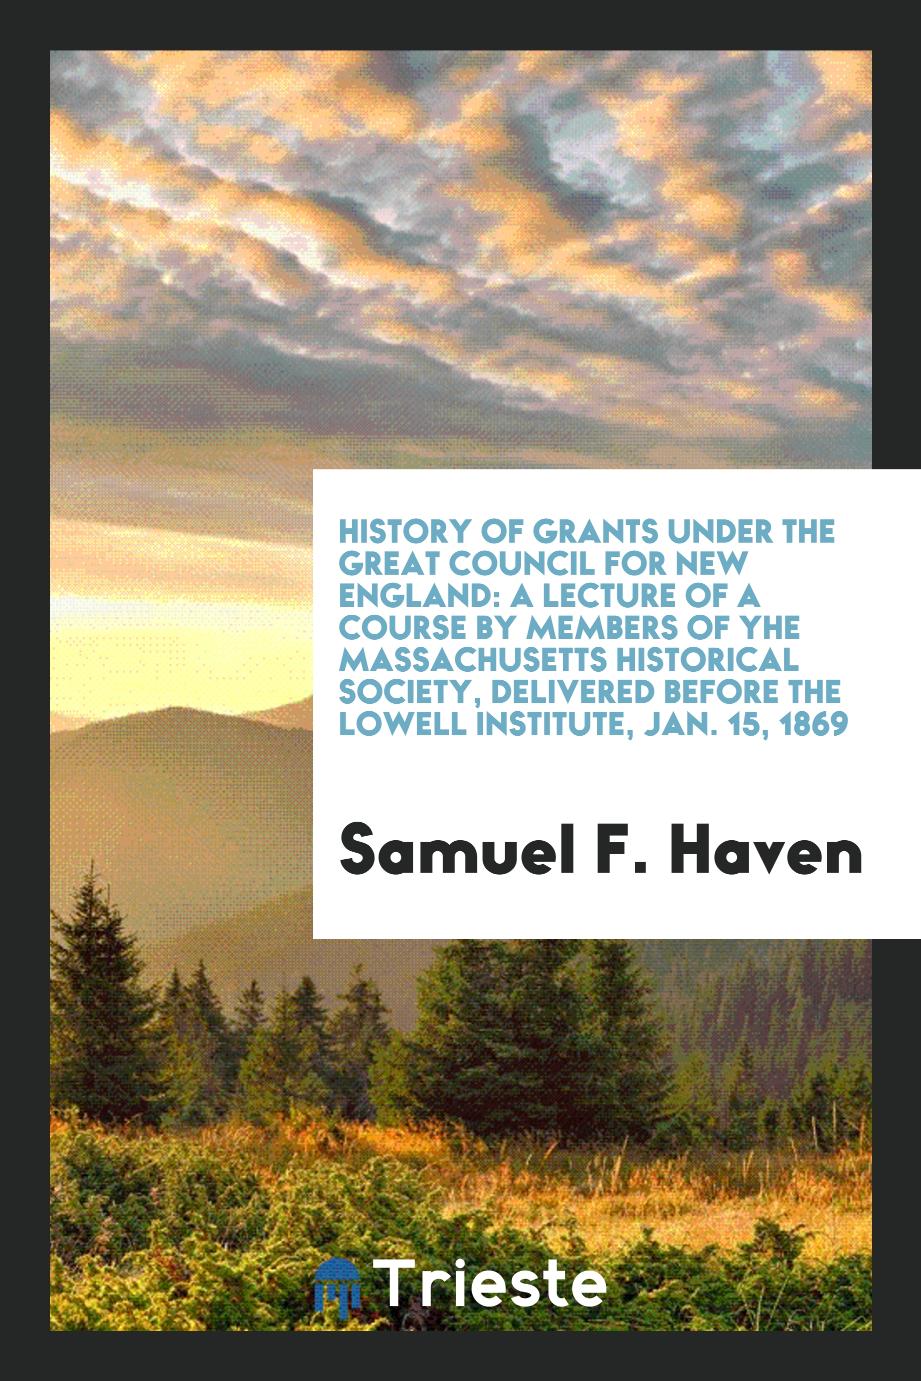 History of grants under the great Council for New England: a lecture of a course by members of yhe massachusetts historical society, Delivered before the Lowell Institute, Jan. 15, 1869